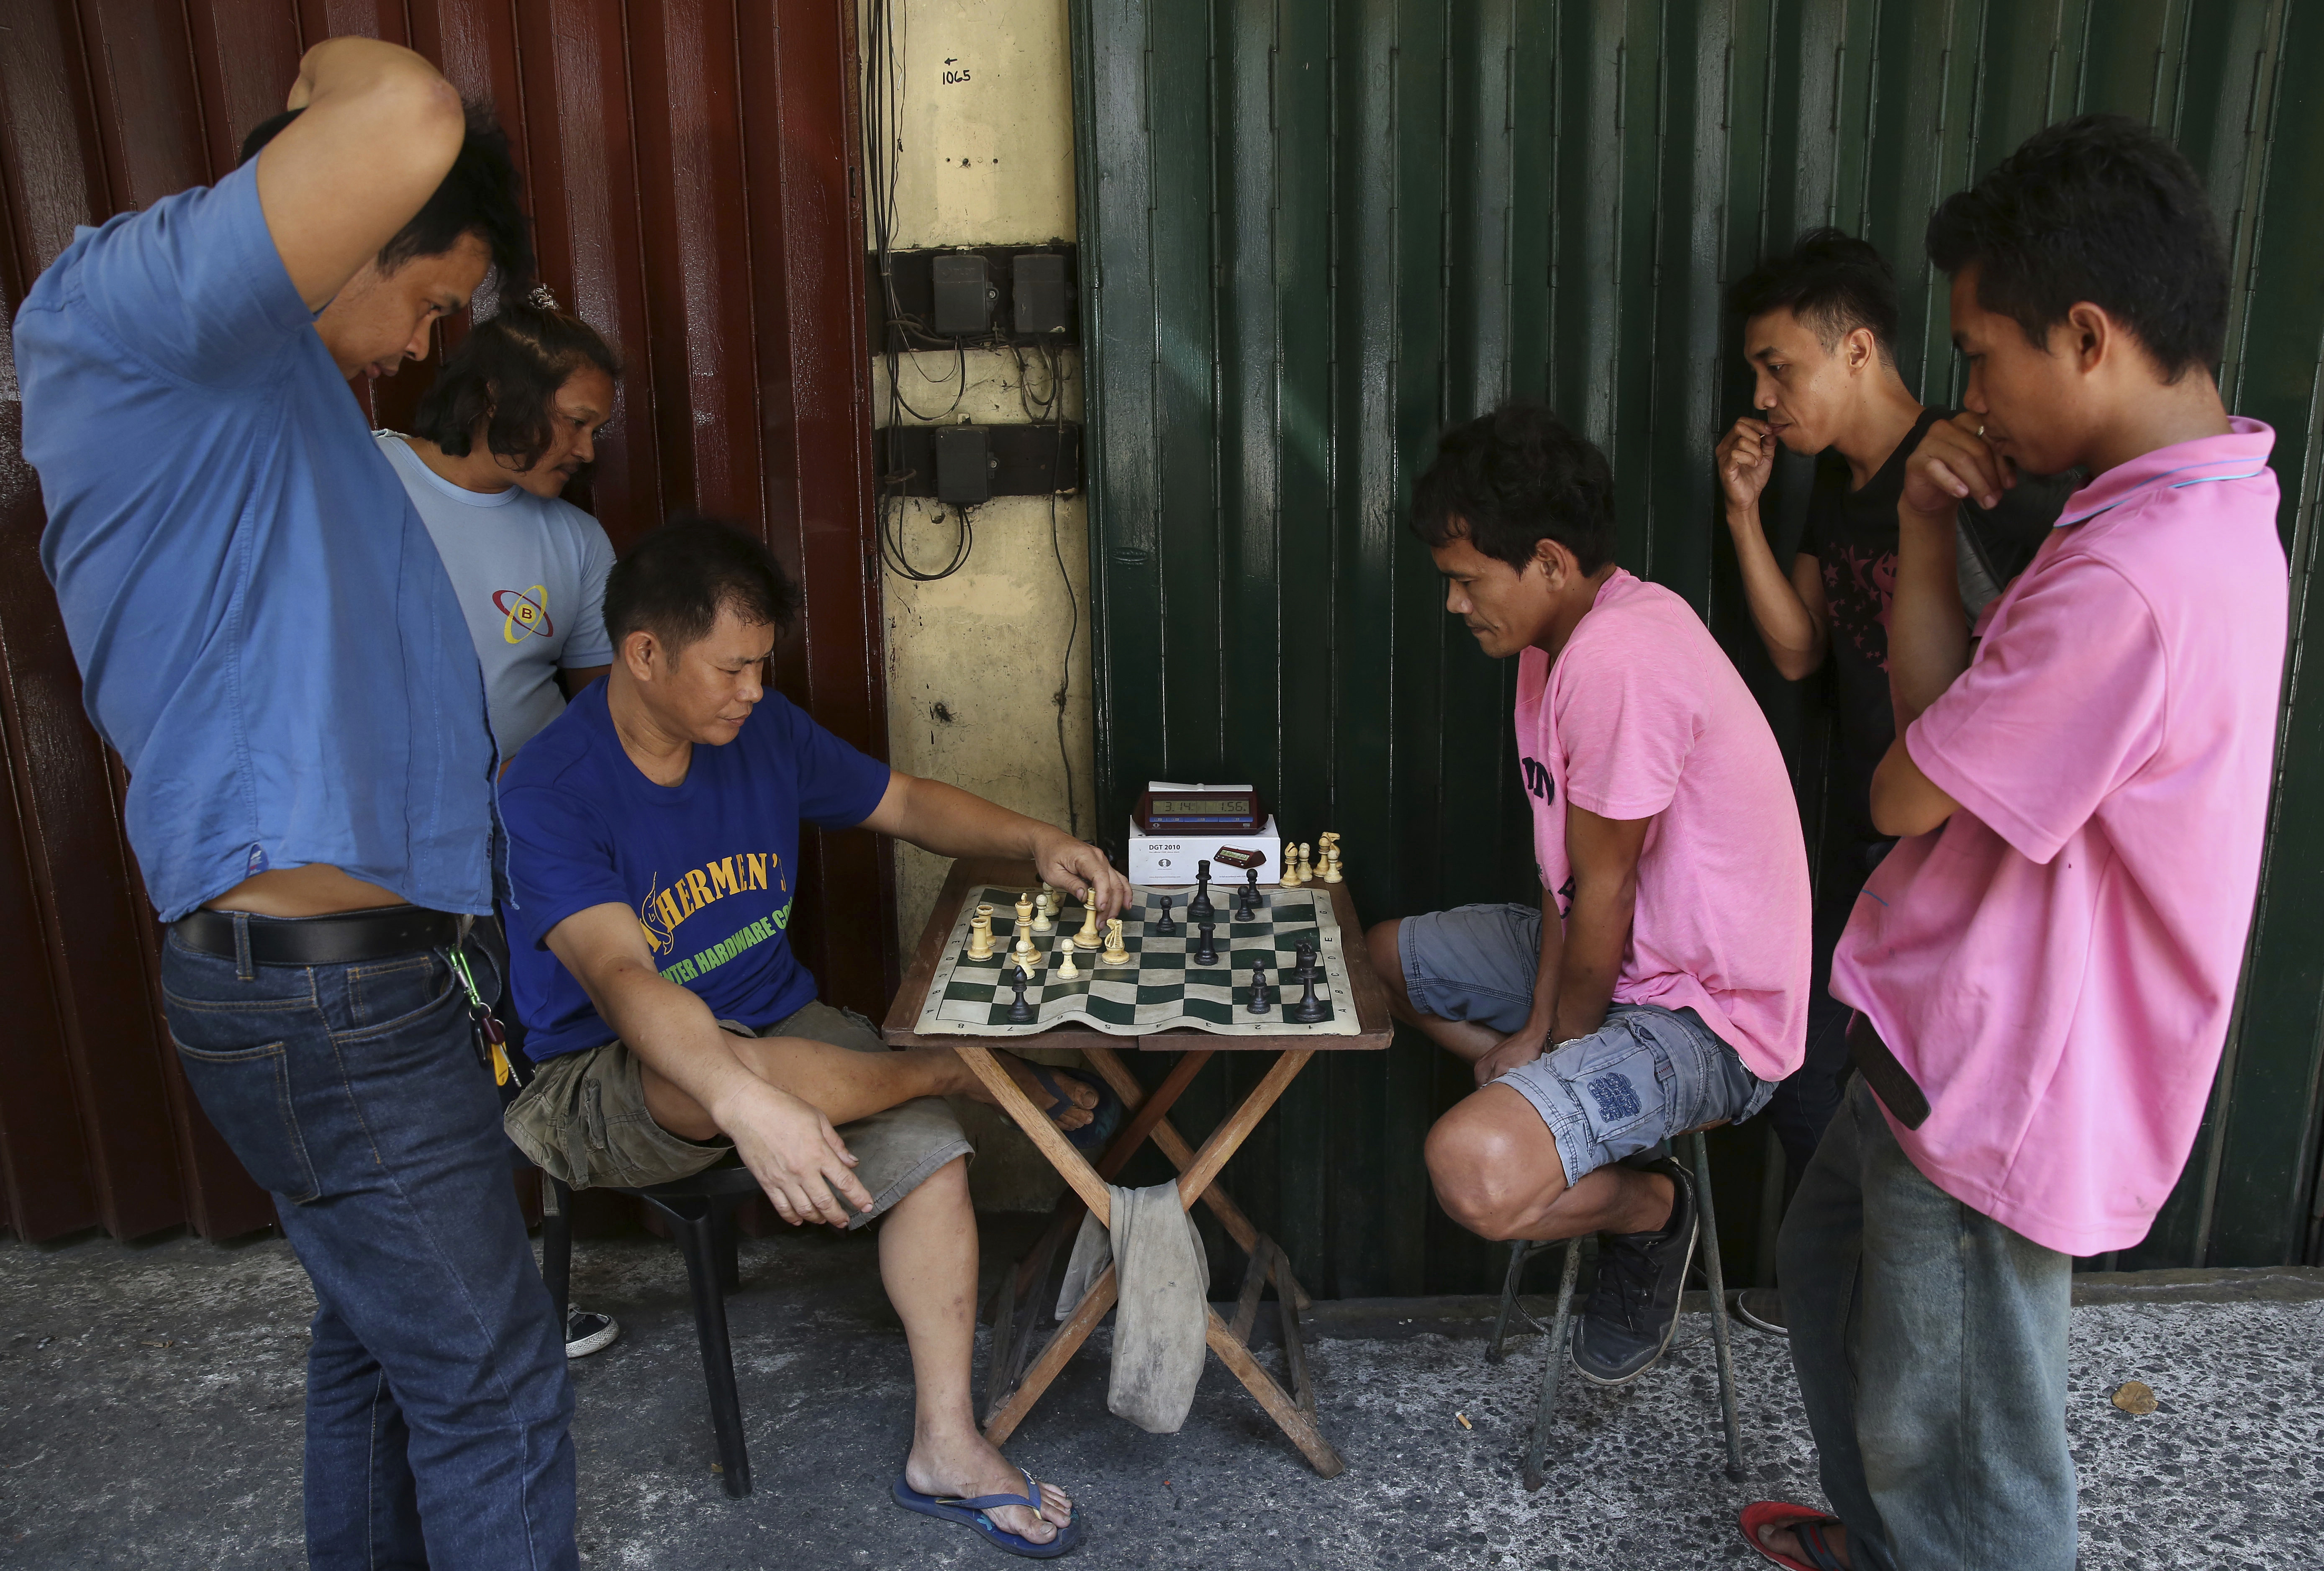 Workers play chess during their lunch break in downtown Manila, Philippines Tuesday, May 16, 2017. Chess is a popular game in the Philippines. (AP Photo/Aaron Favila)